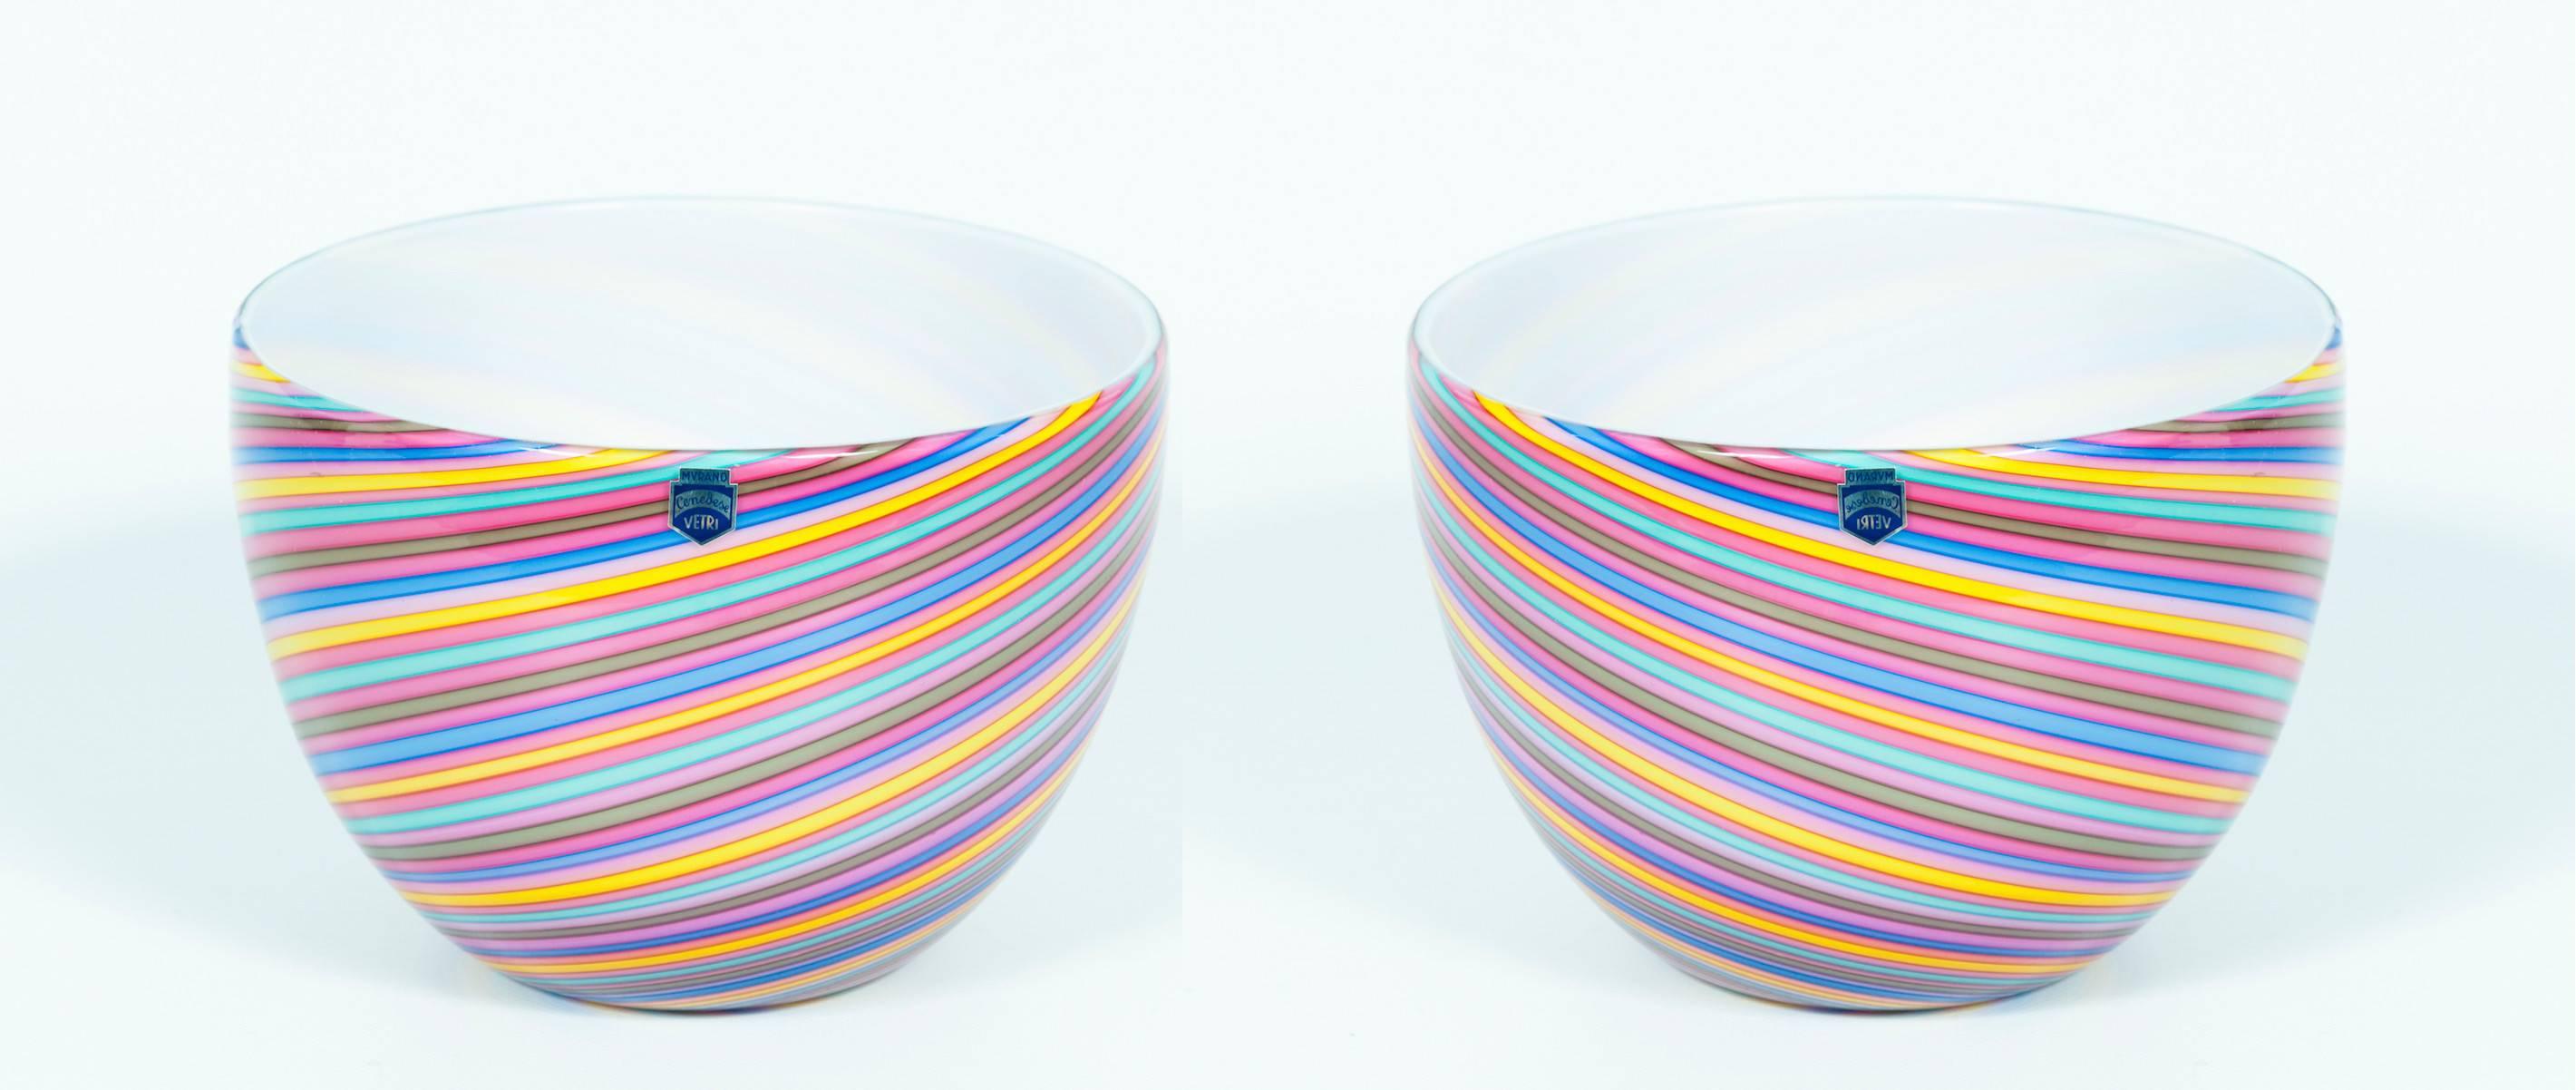 Italy 1970s Cenedese a duo of rainbow bowls in Murano glass showcasing stripes.
Unique pair of elegant bowls with twisted stripes in pink rainbow colors, in very excellent original conditions, as represented in the pictures.
The bowls are in